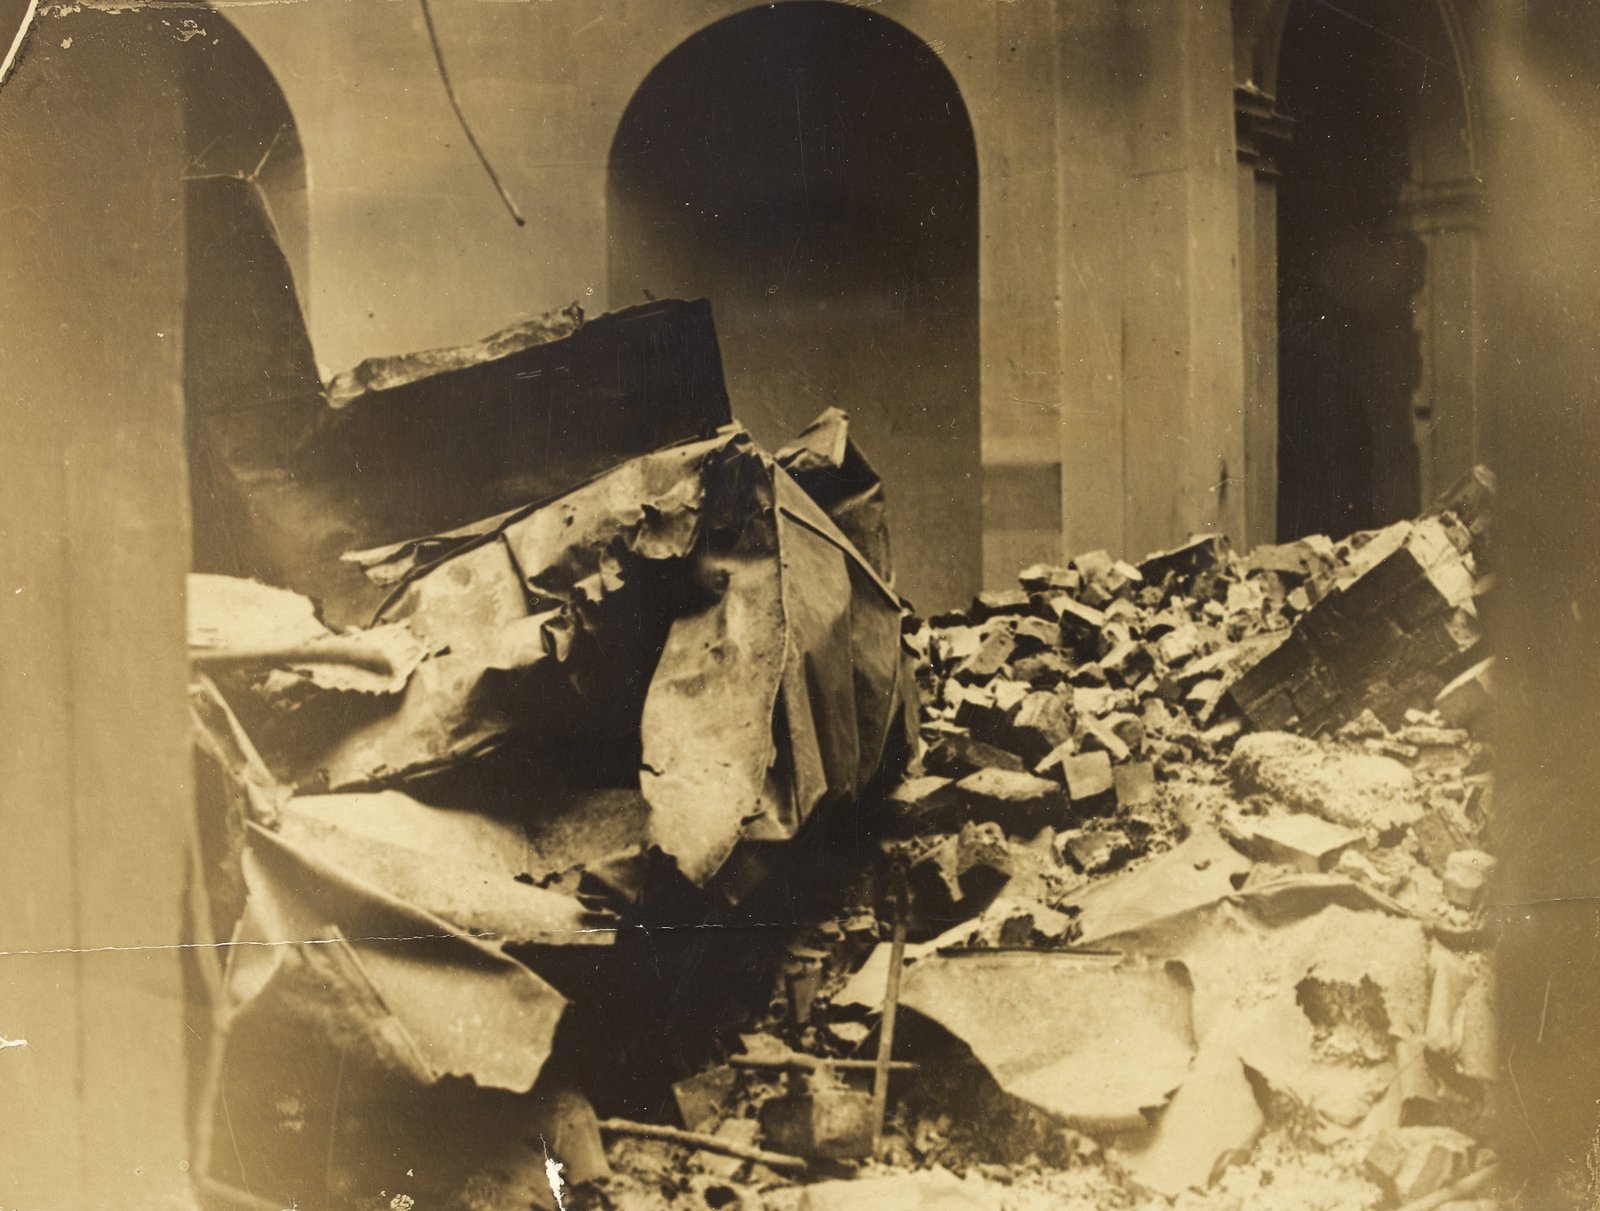 Image - The ruins of the Custom House. Image courtesy of the National Library of Ireland